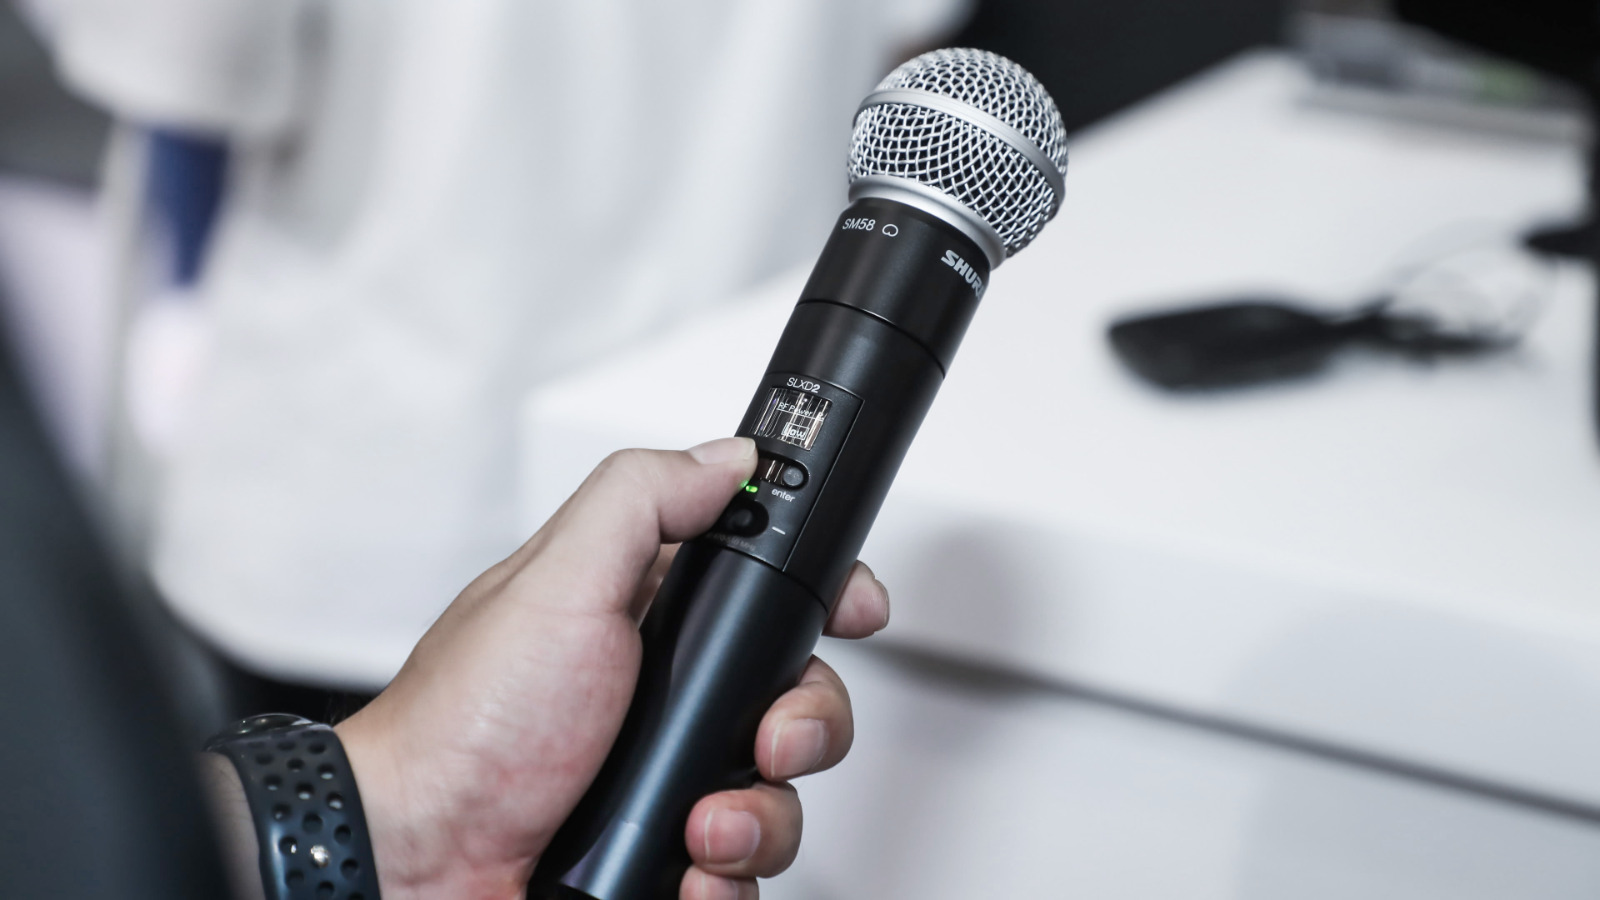 What Uhf Frequencies Can I Use For Wireless Microphone